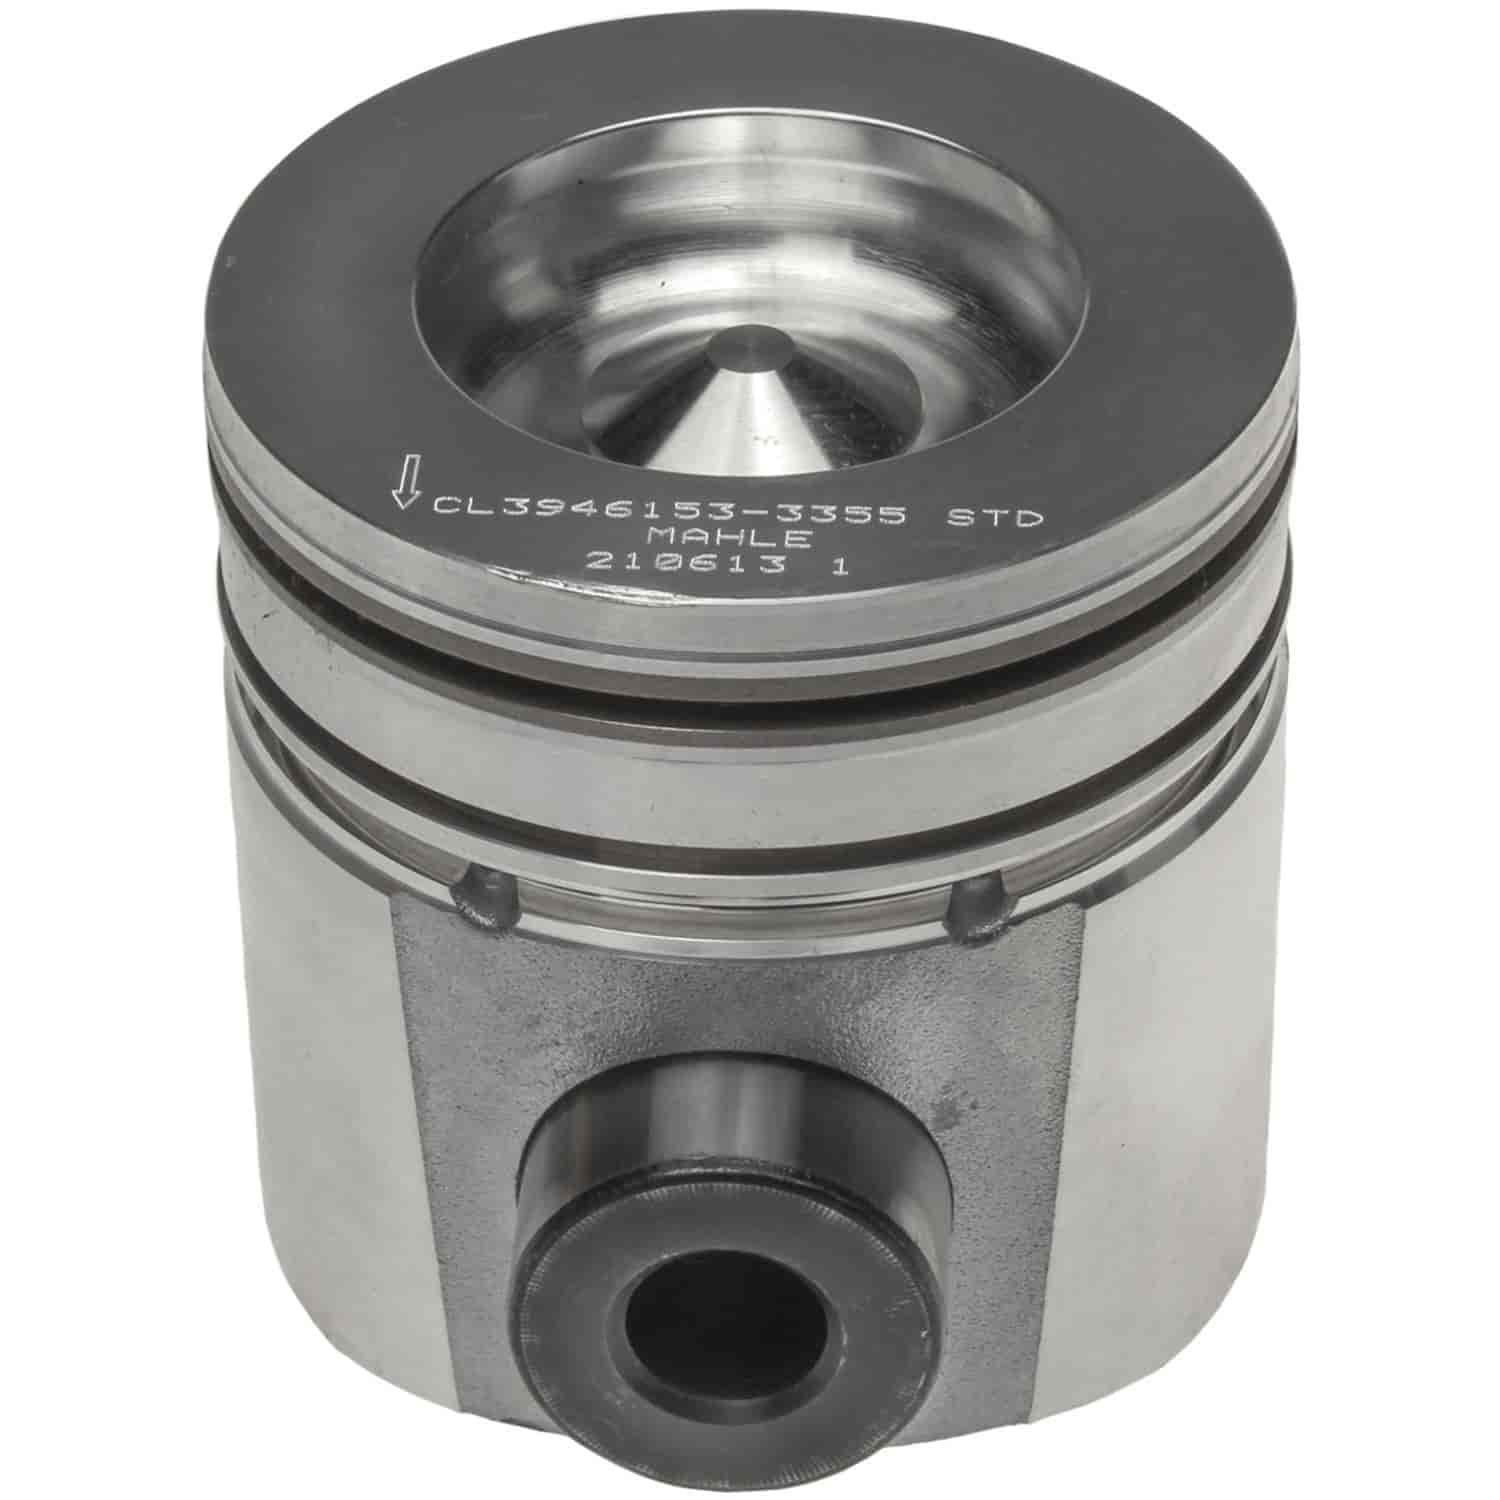 Piston With Rings 2001-2002 Dodge, Fits Cummins Diesel L6 5.9L with 4.016" Bore (Standard)